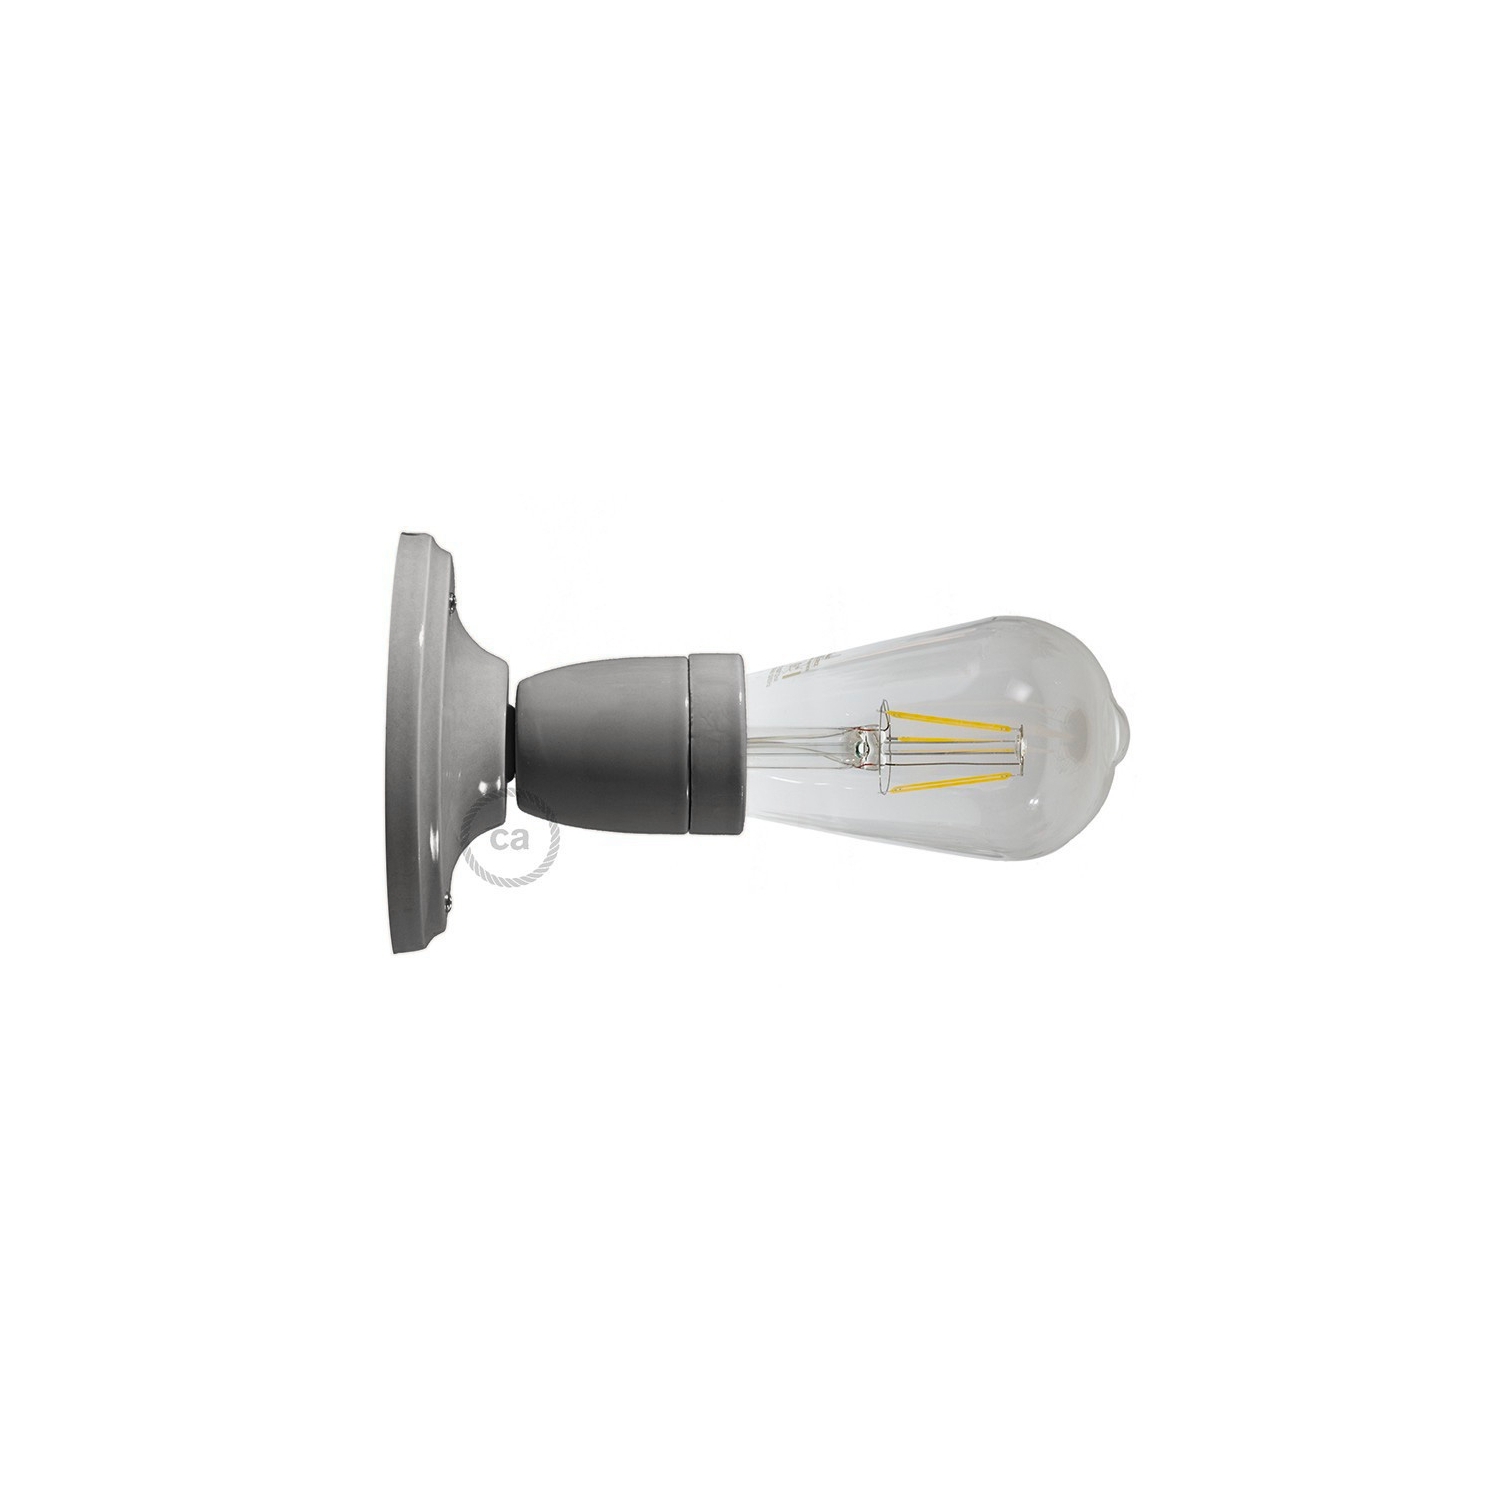 Fermaluce Classic, the wall or ceiling light source in gray porcelain.